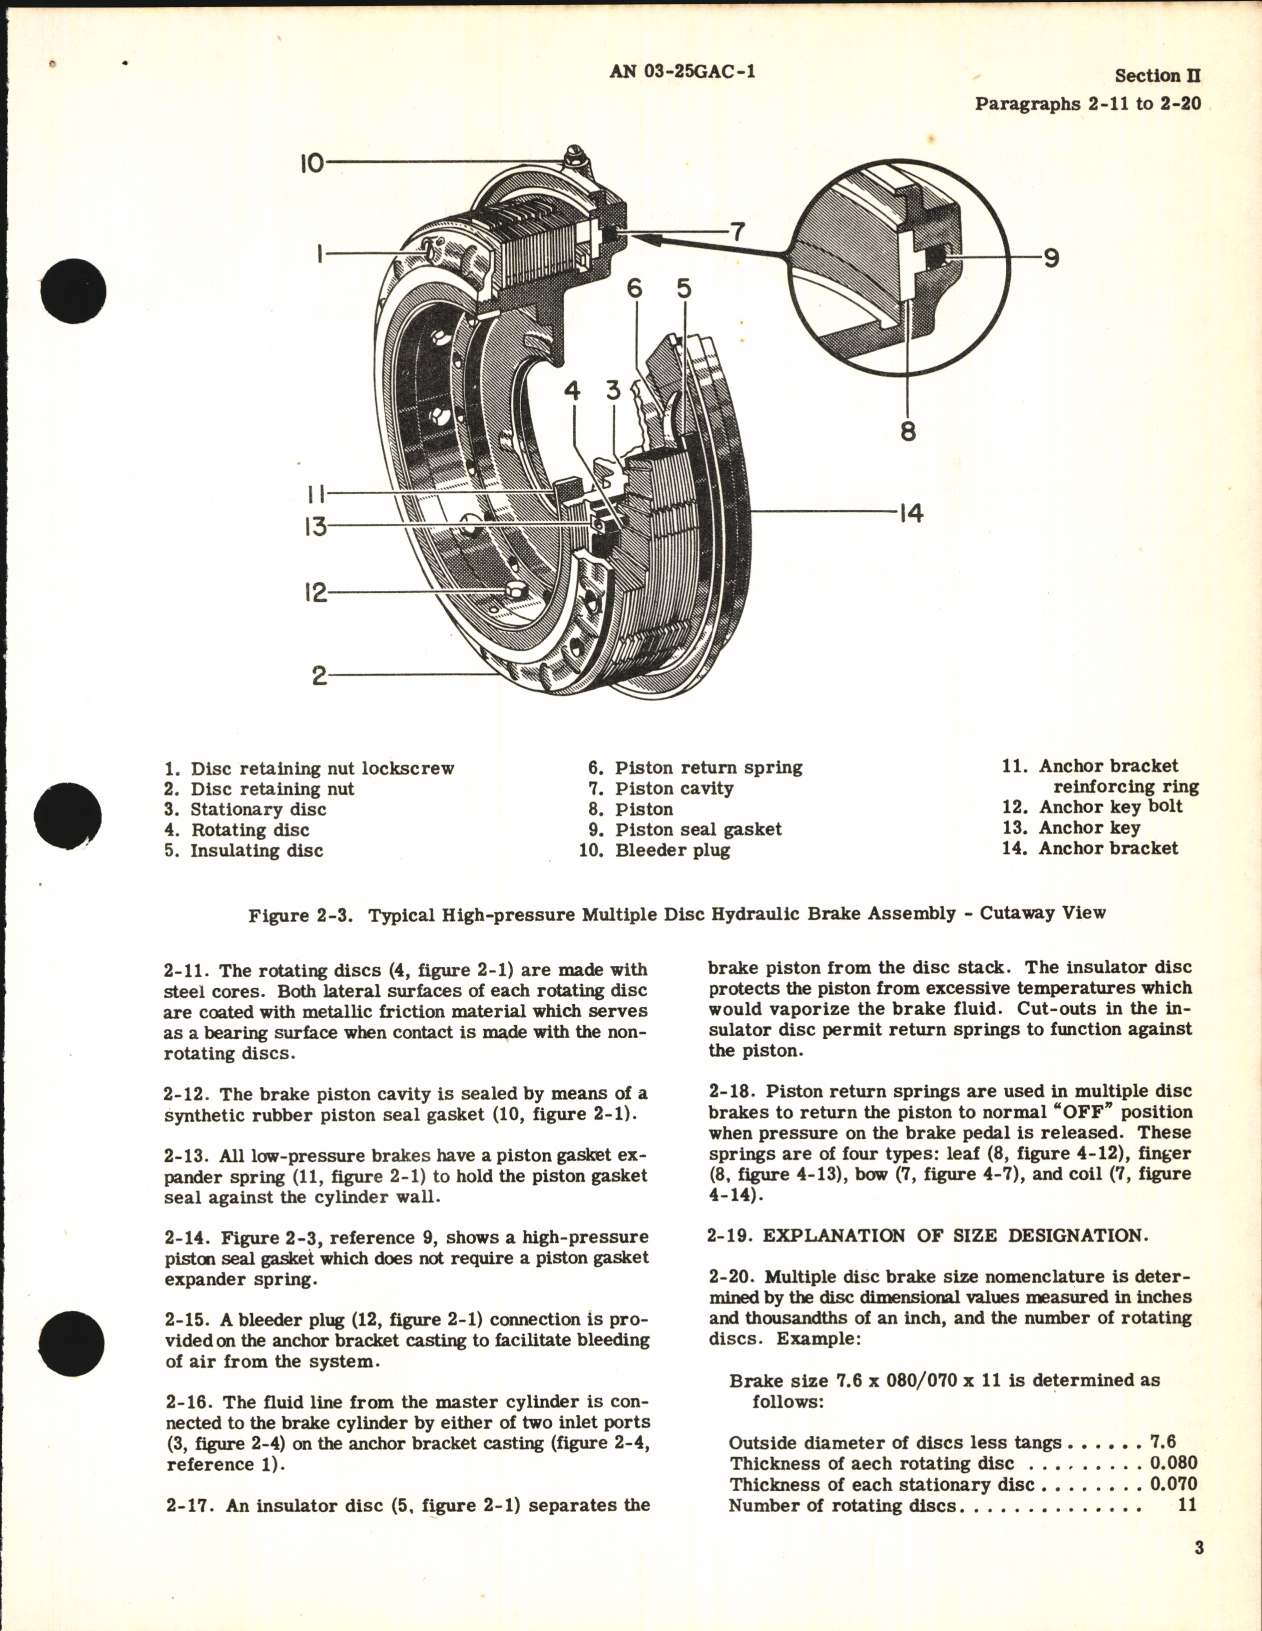 Sample page 7 from AirCorps Library document: Overhaul Instructions for Multiple Disc Brakes (Goodyear)